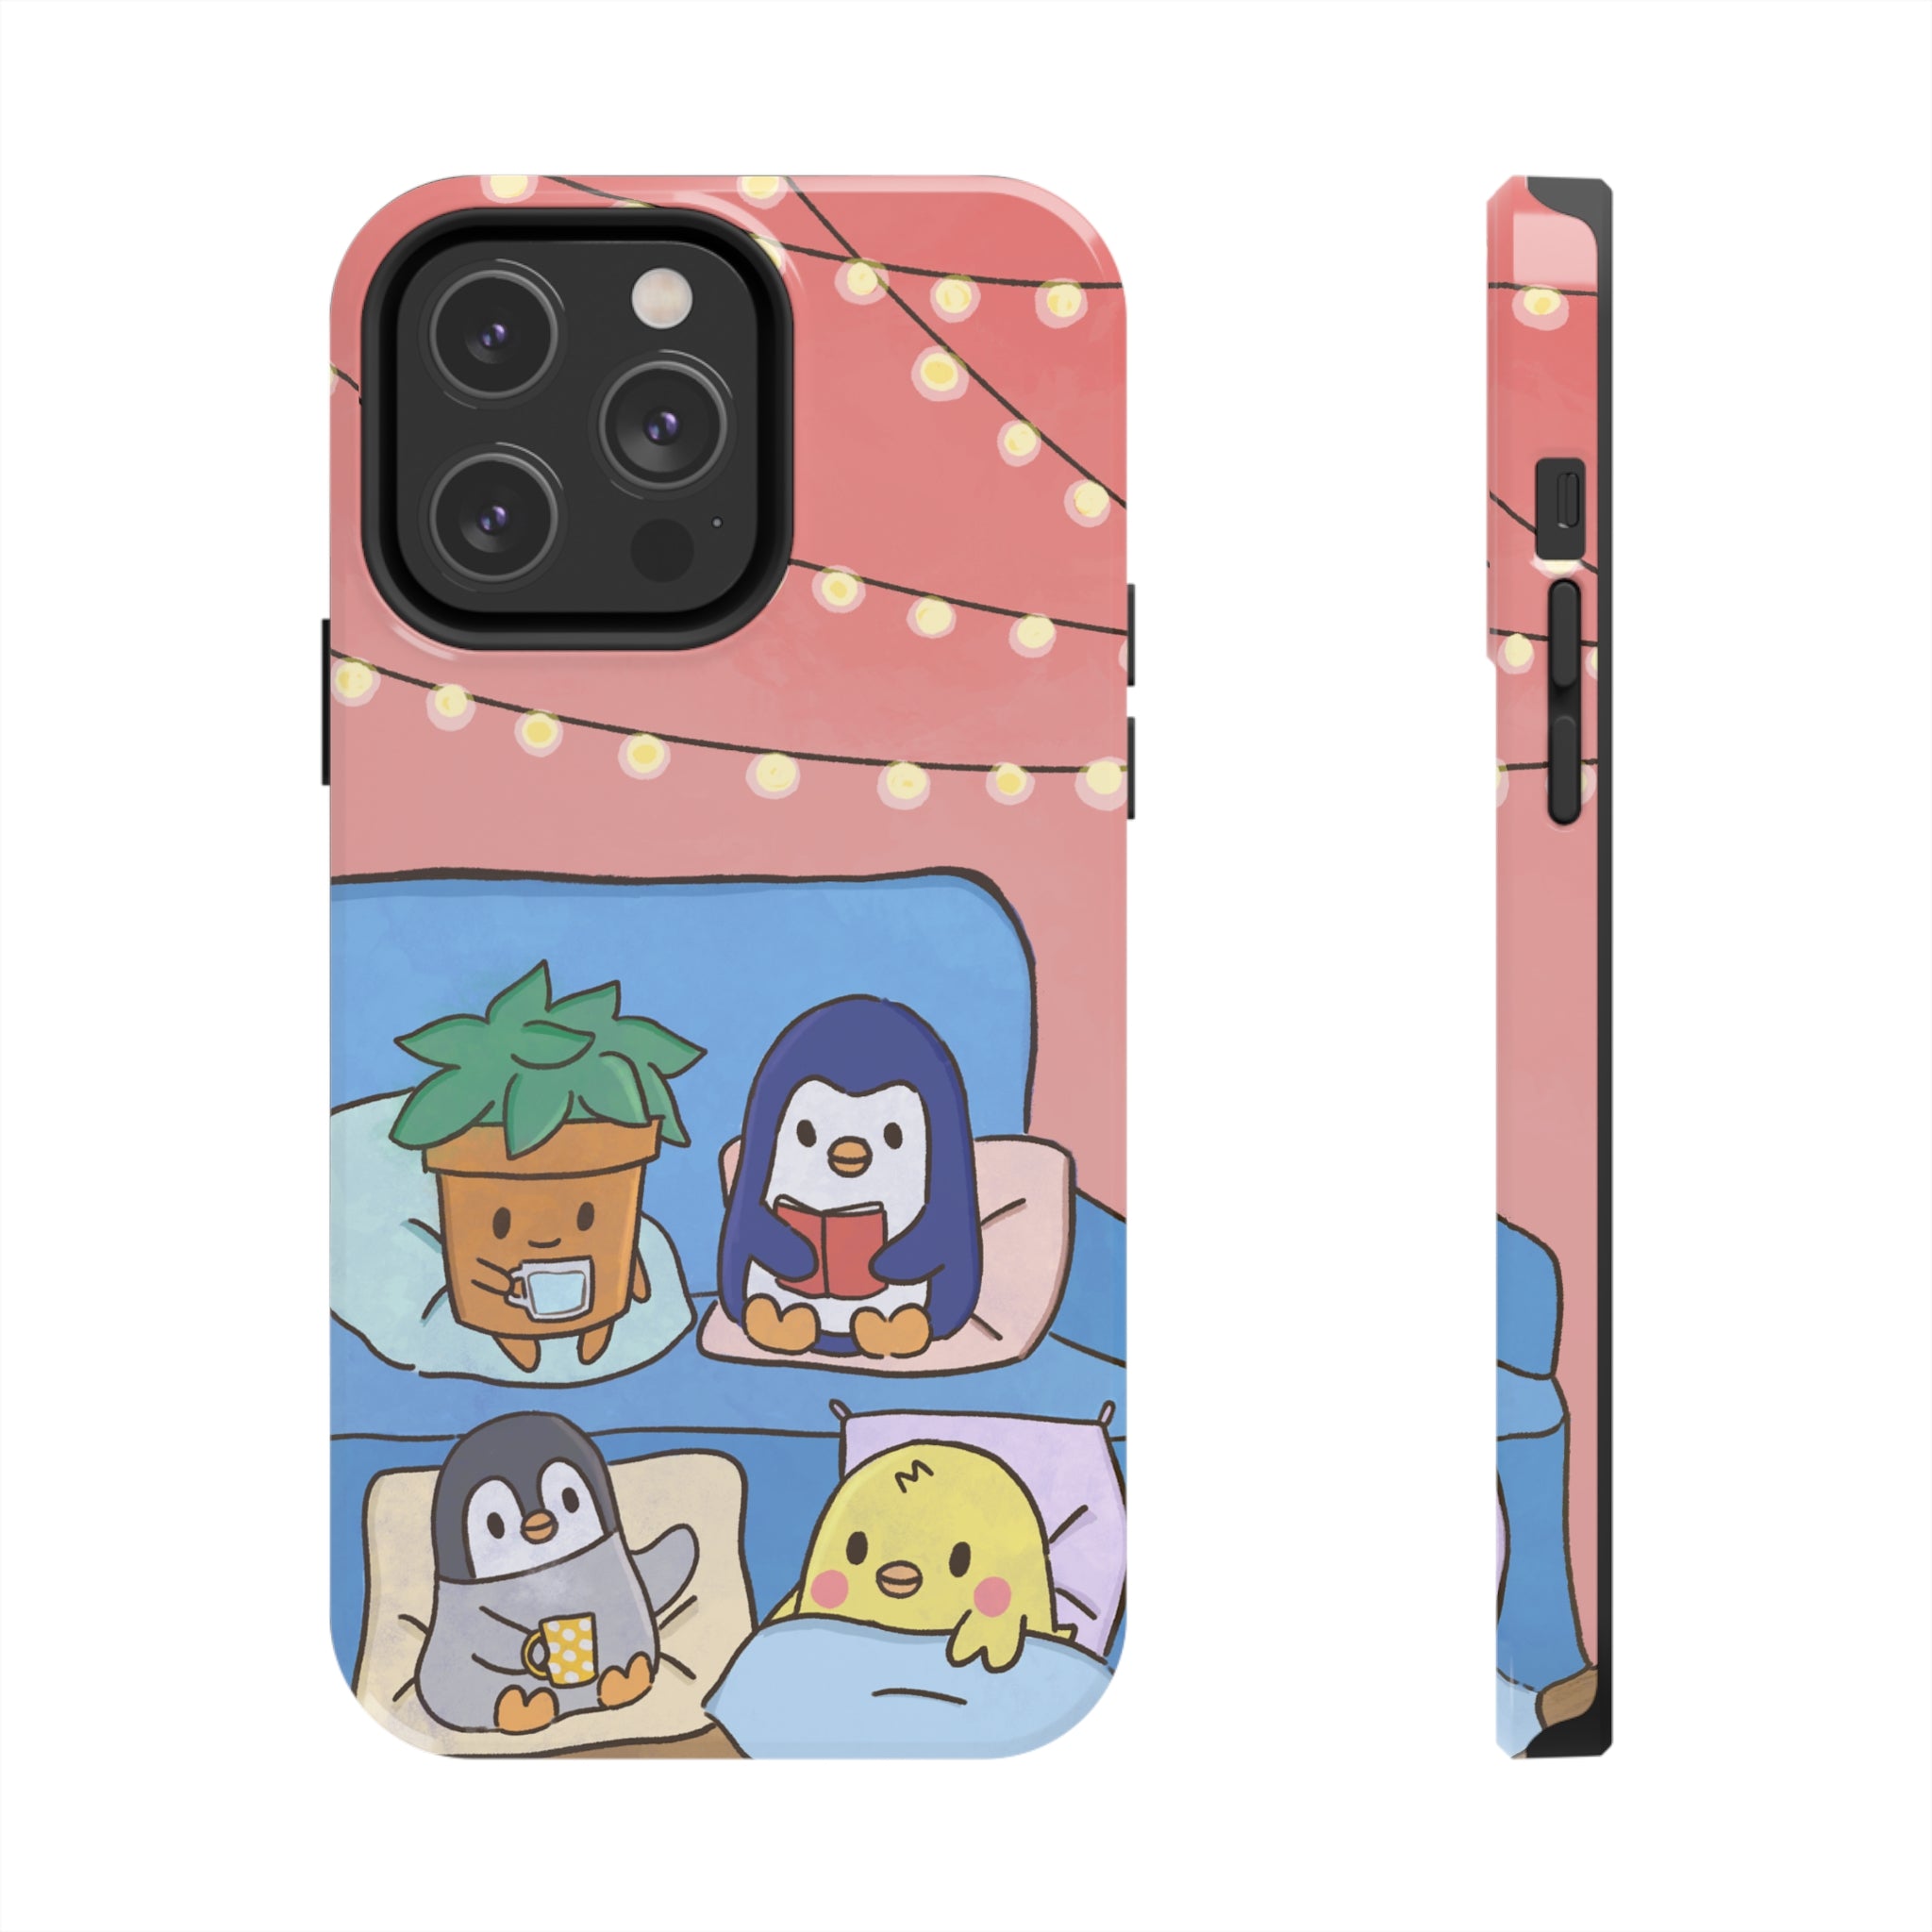 Comfy and Cozy Pink iPhone Case